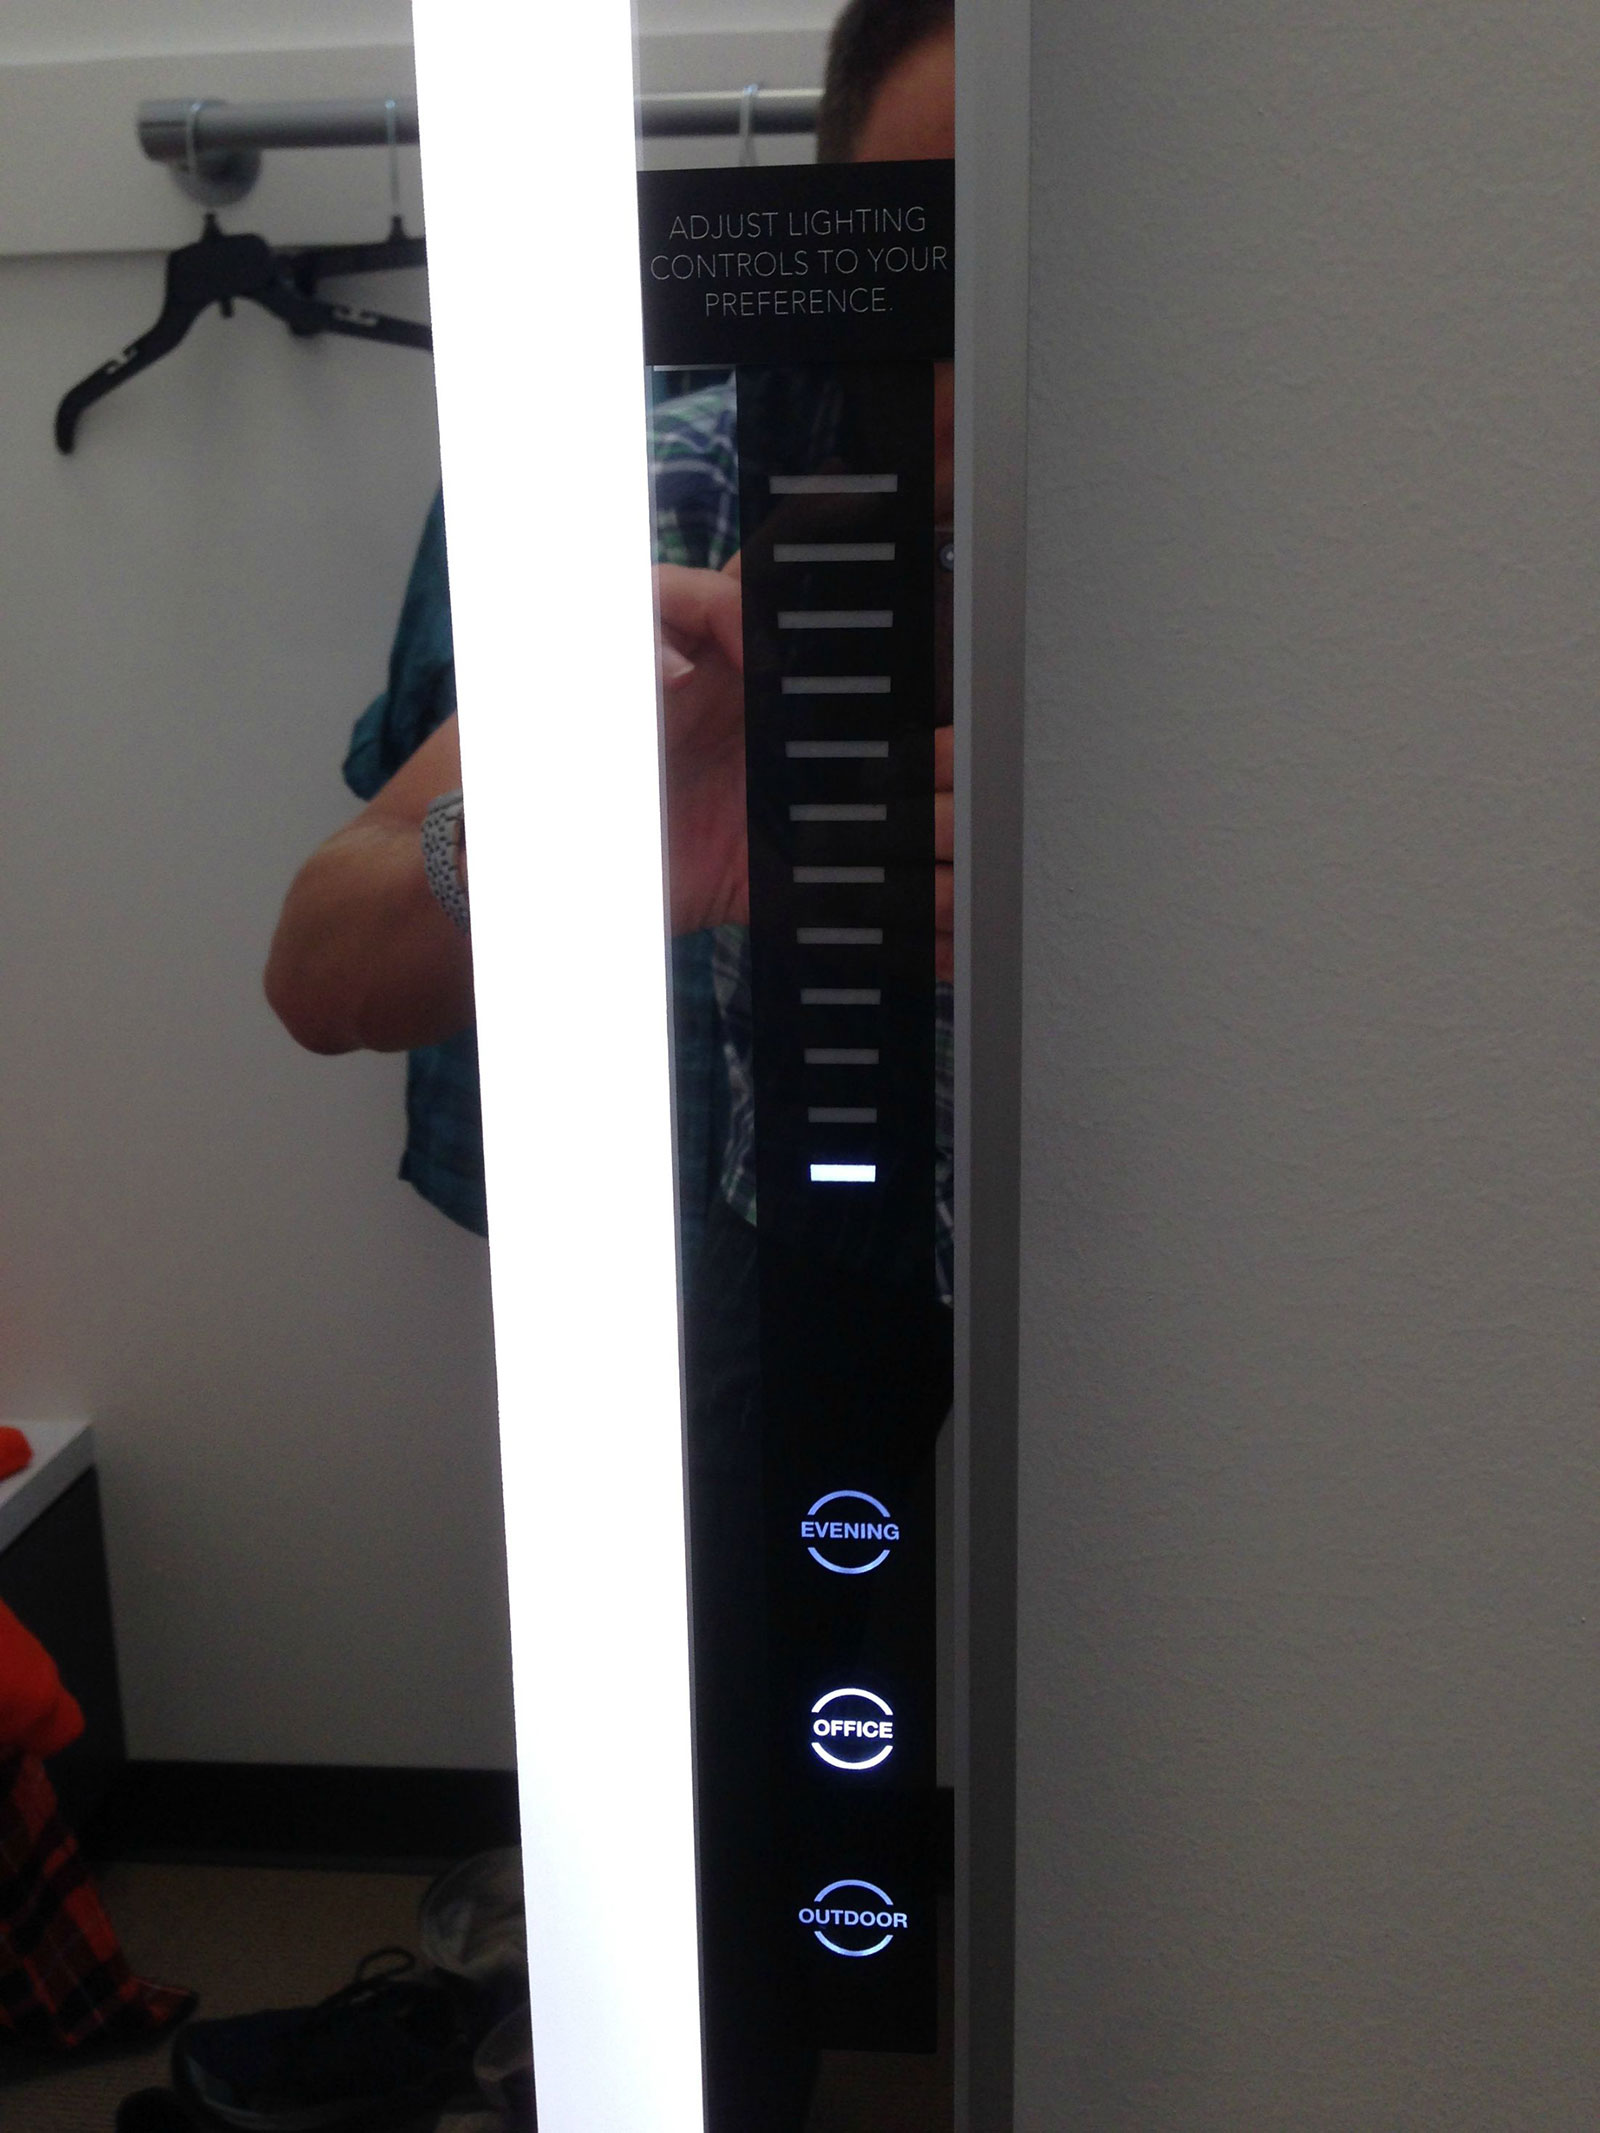 Dressing Room mirror allows you to adjust the lighting  type and brightness.